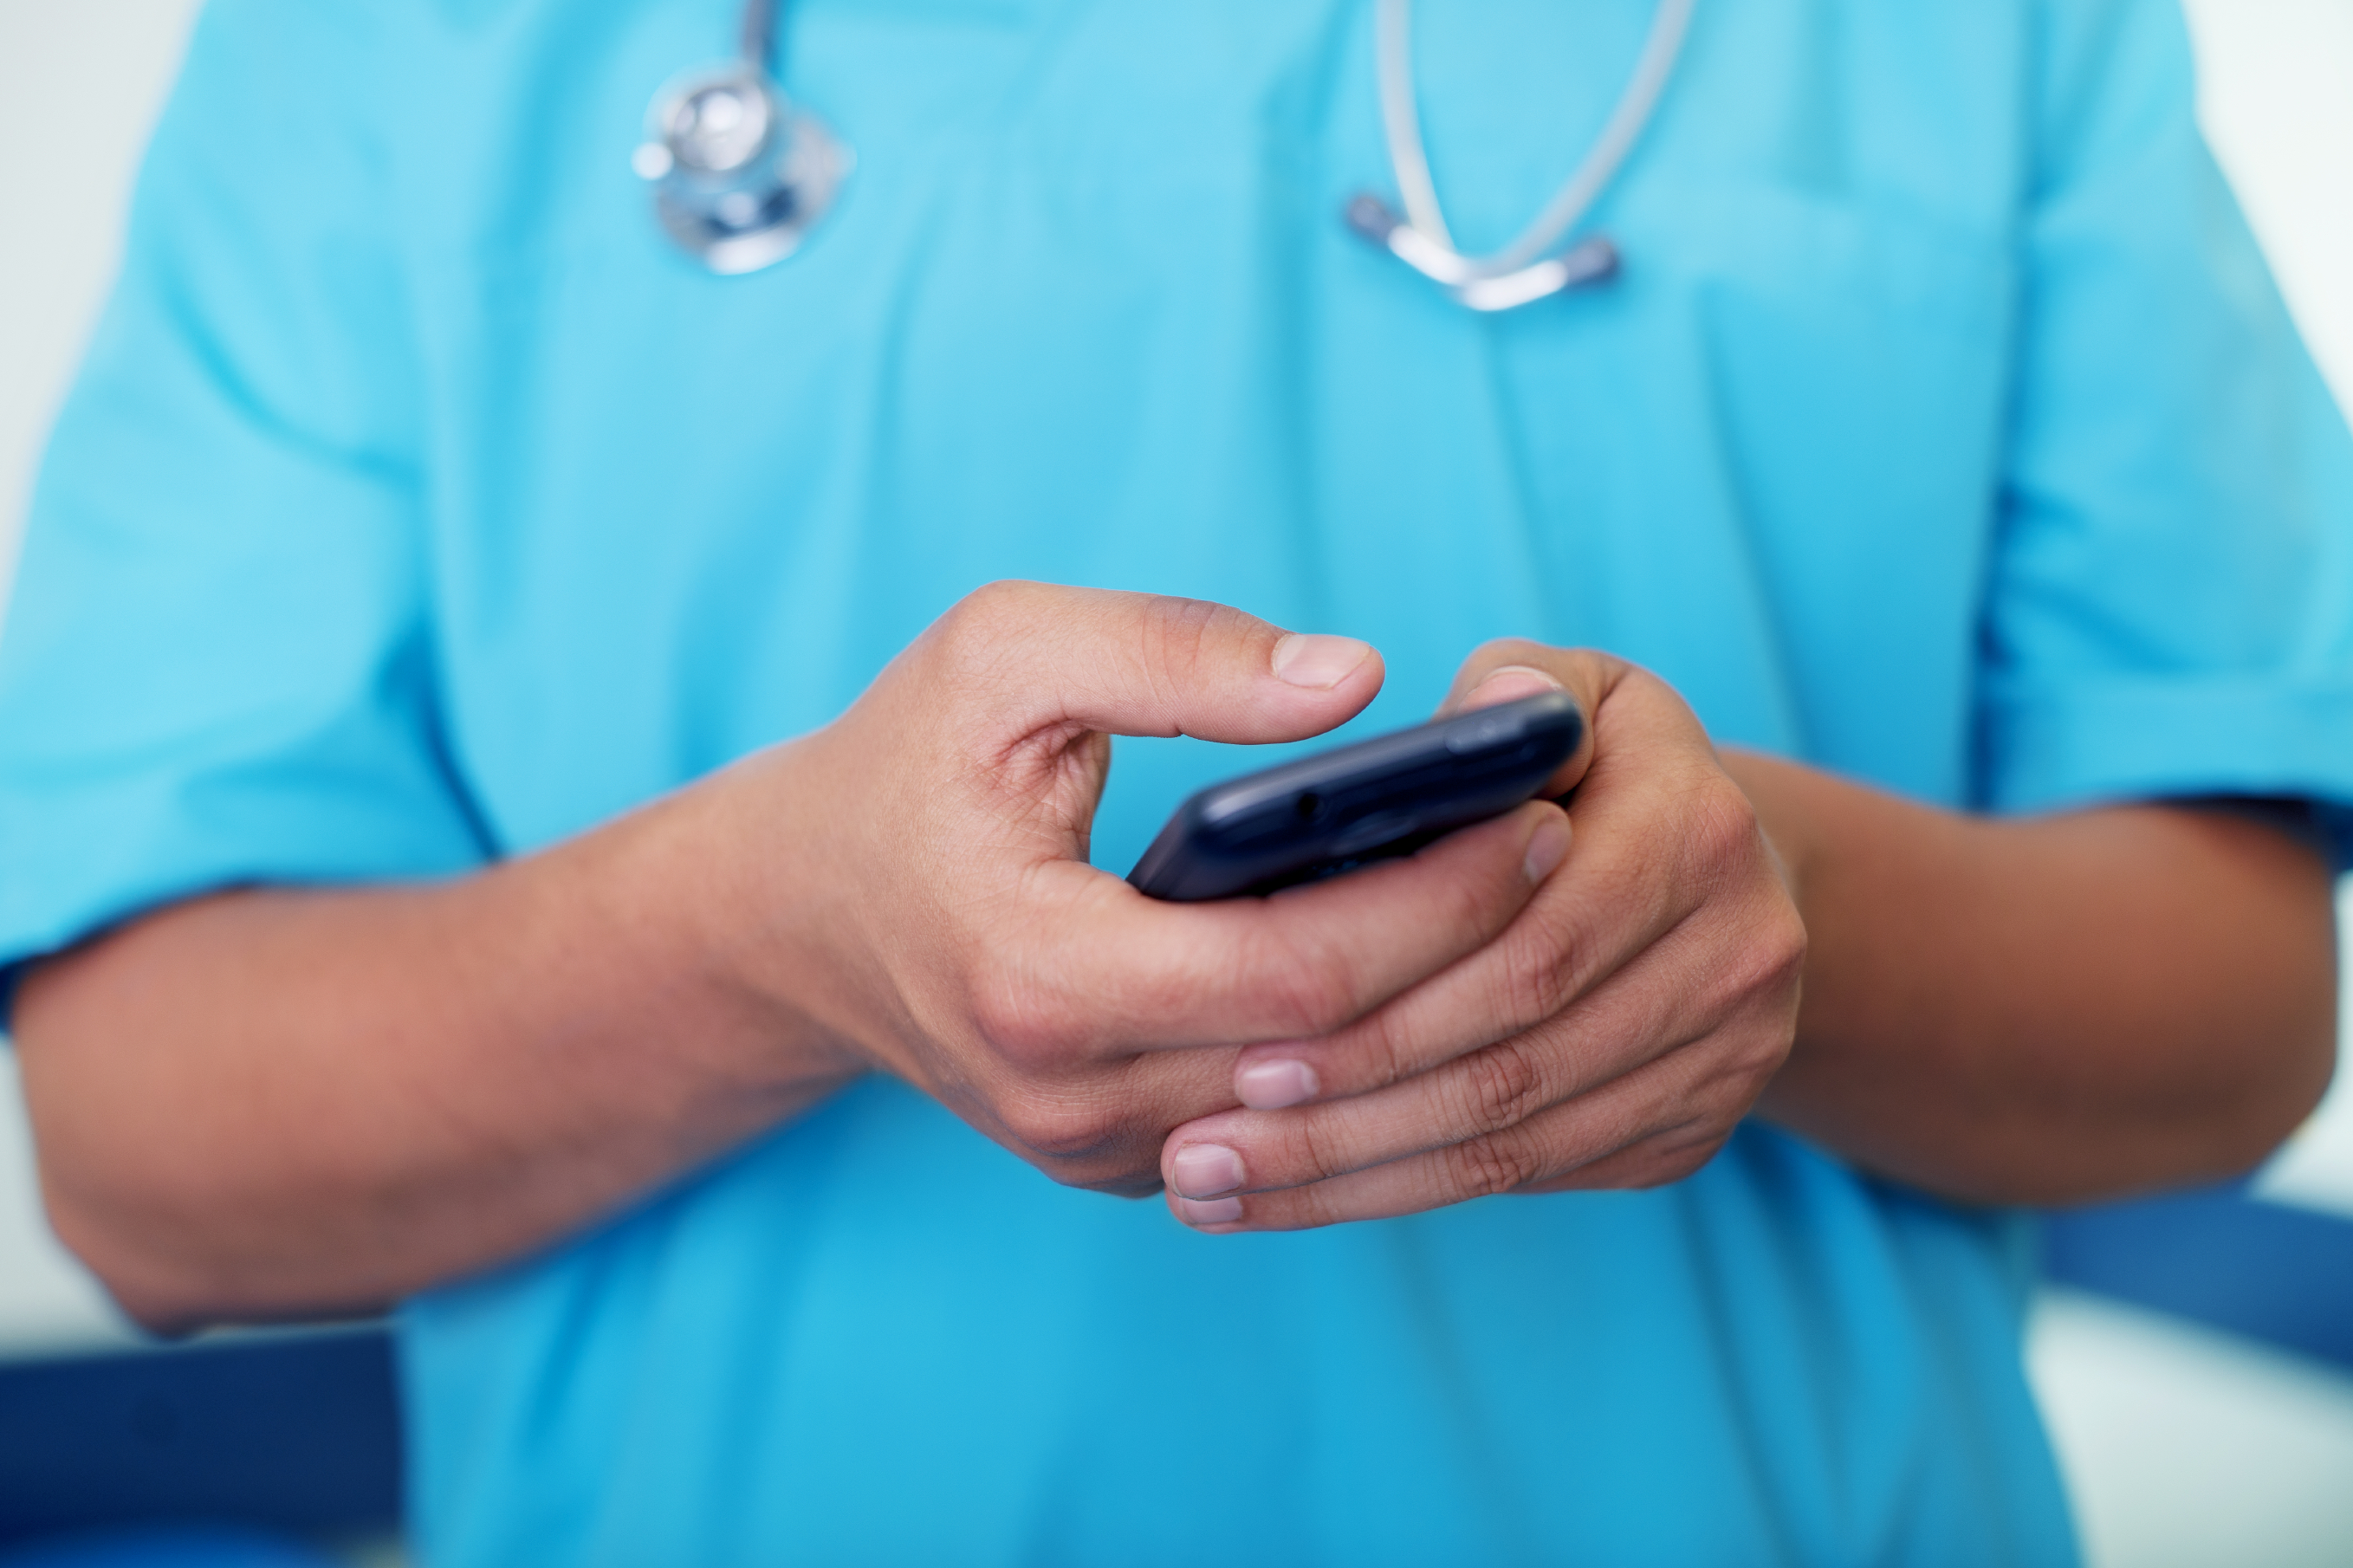 Doctors and the Etiquette of Mobile Device Use News